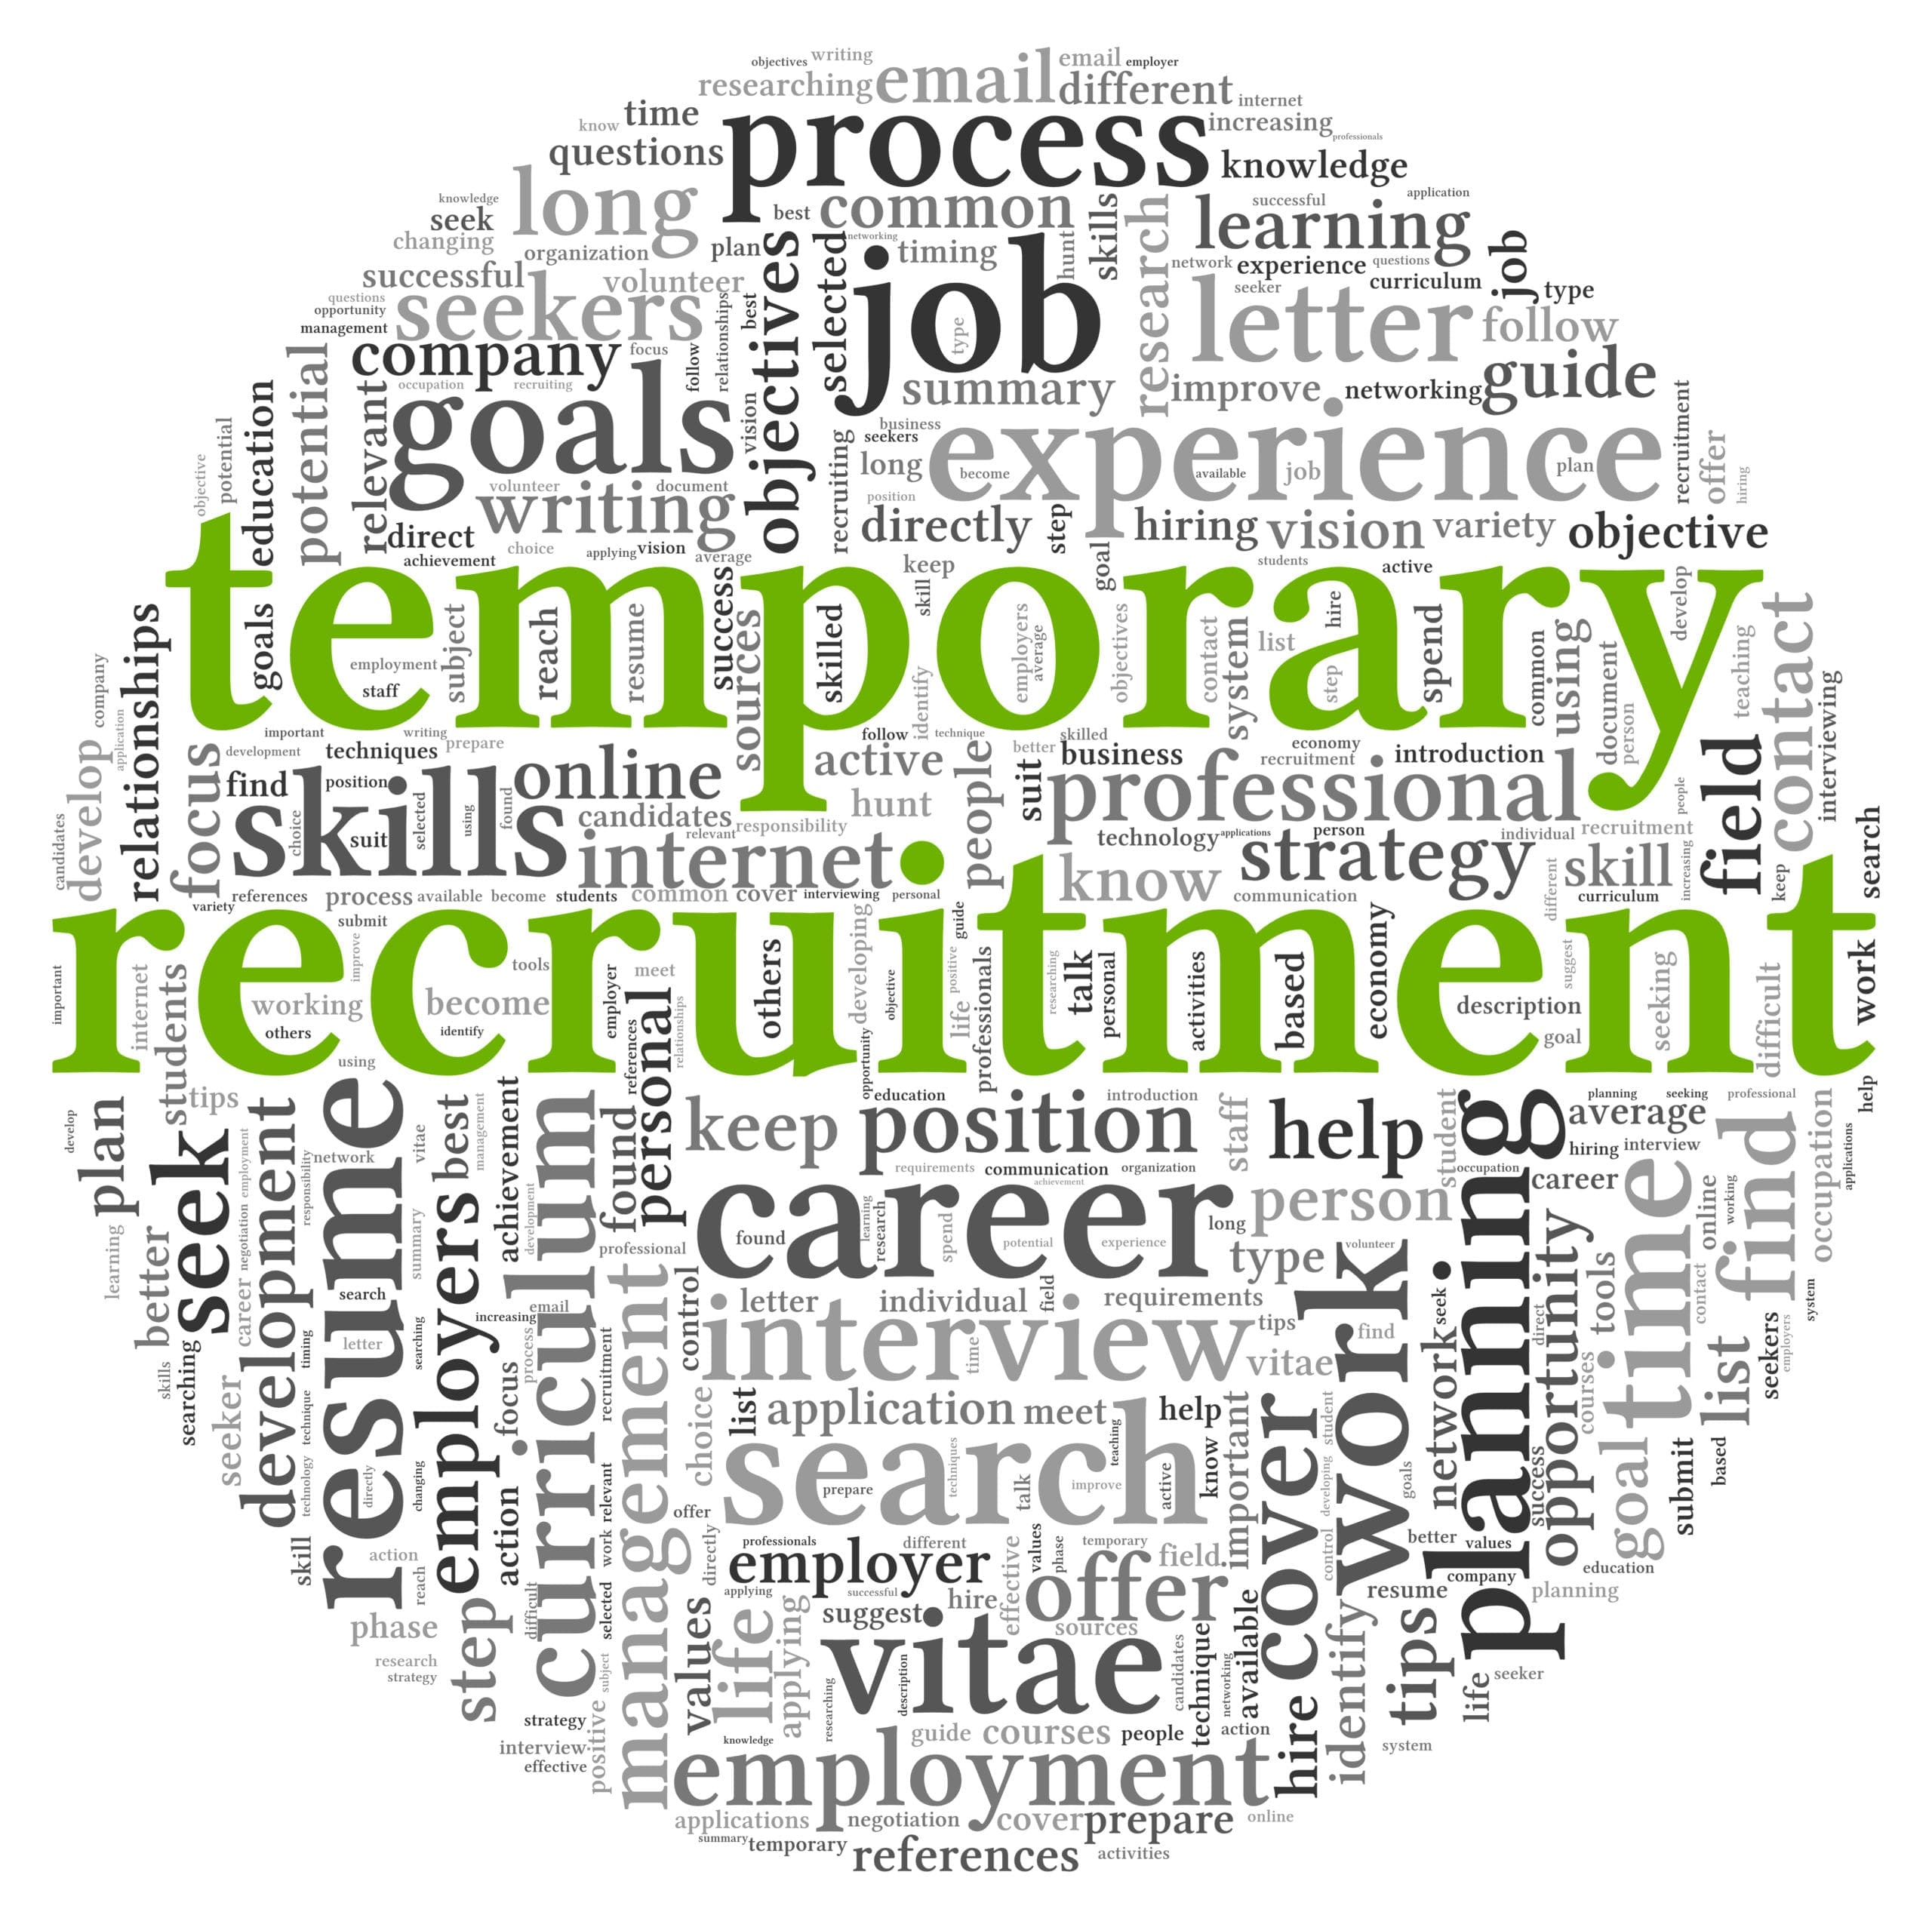 Recruitment market update and the benefits of using temp staff